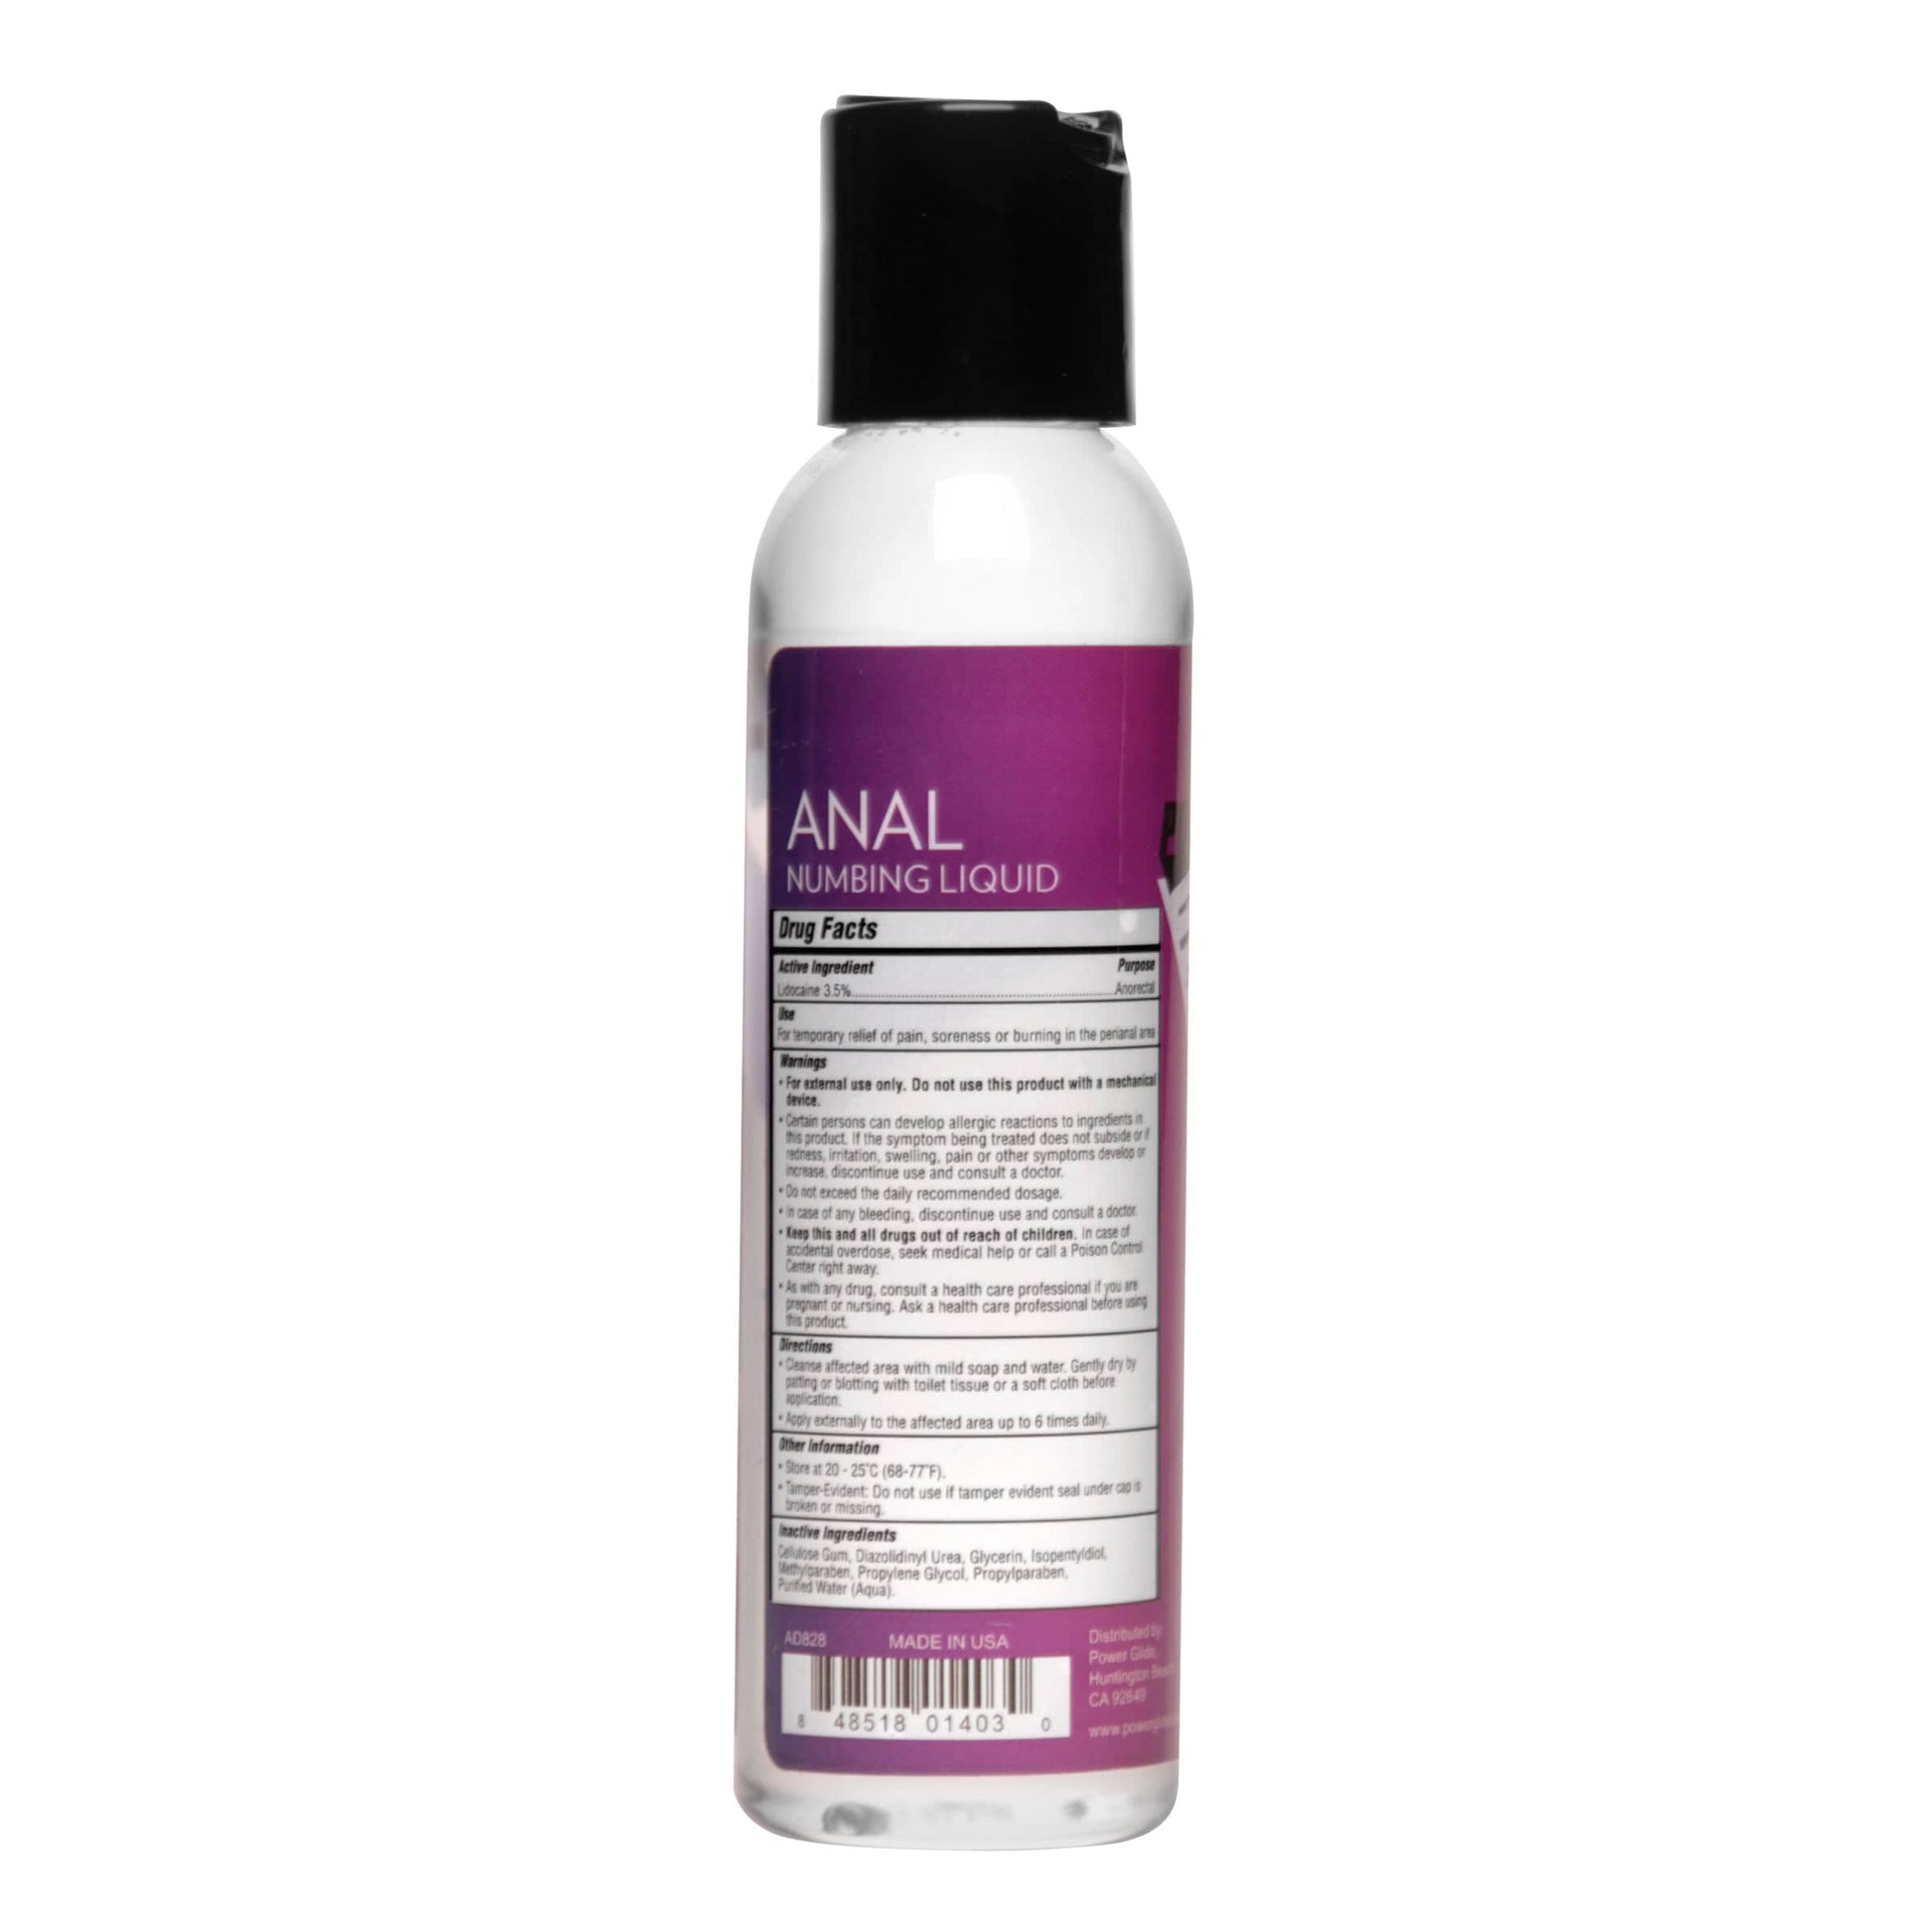 Power Glide Silicone Lubricant Power Glide Anal Numbing Personal Lubricant- 4 Oz at the Haus of Shag